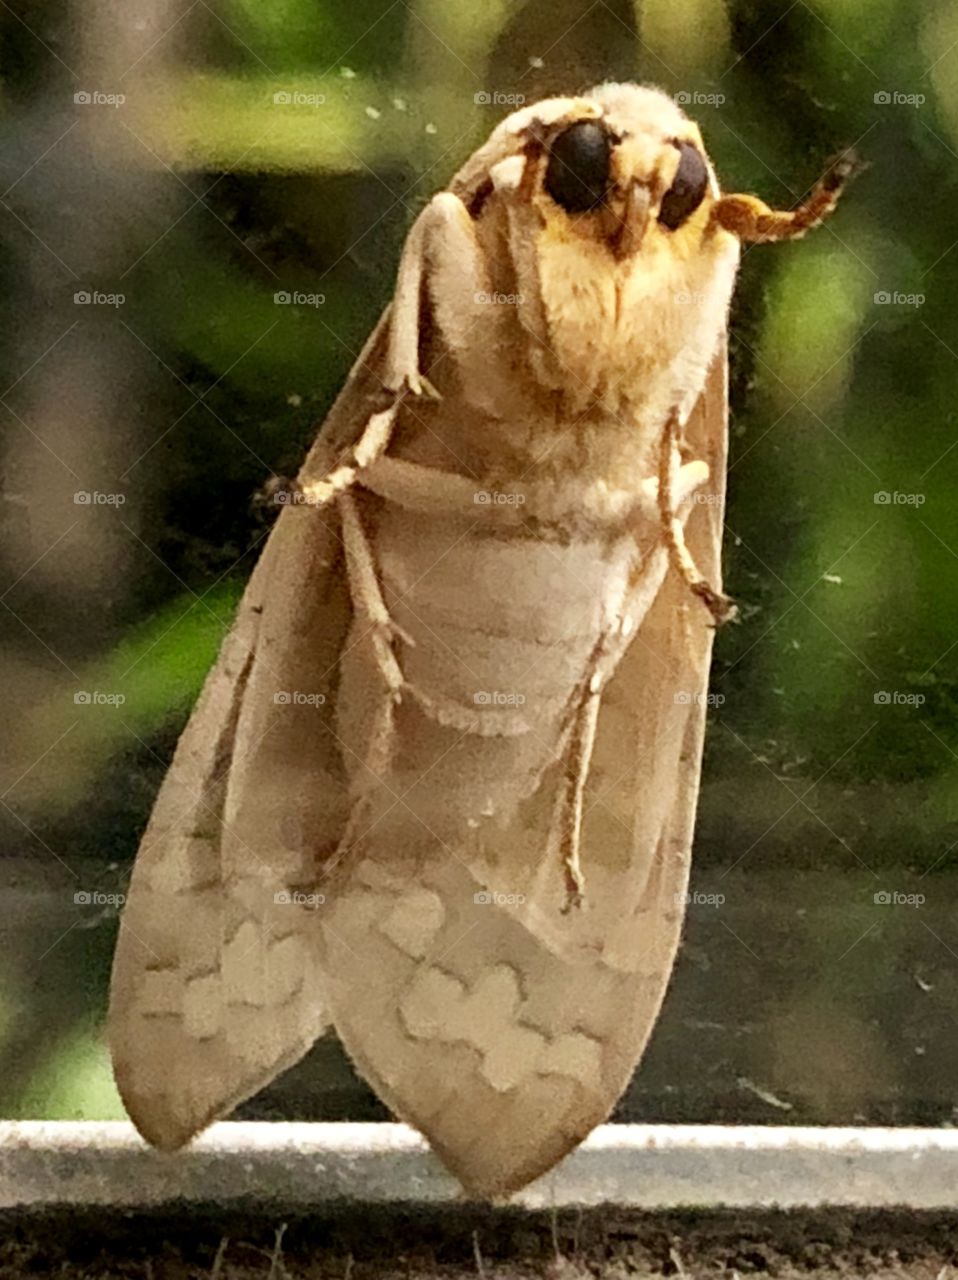 The underside of the curious moth, it’s tiny face pressed closely to the glass door.